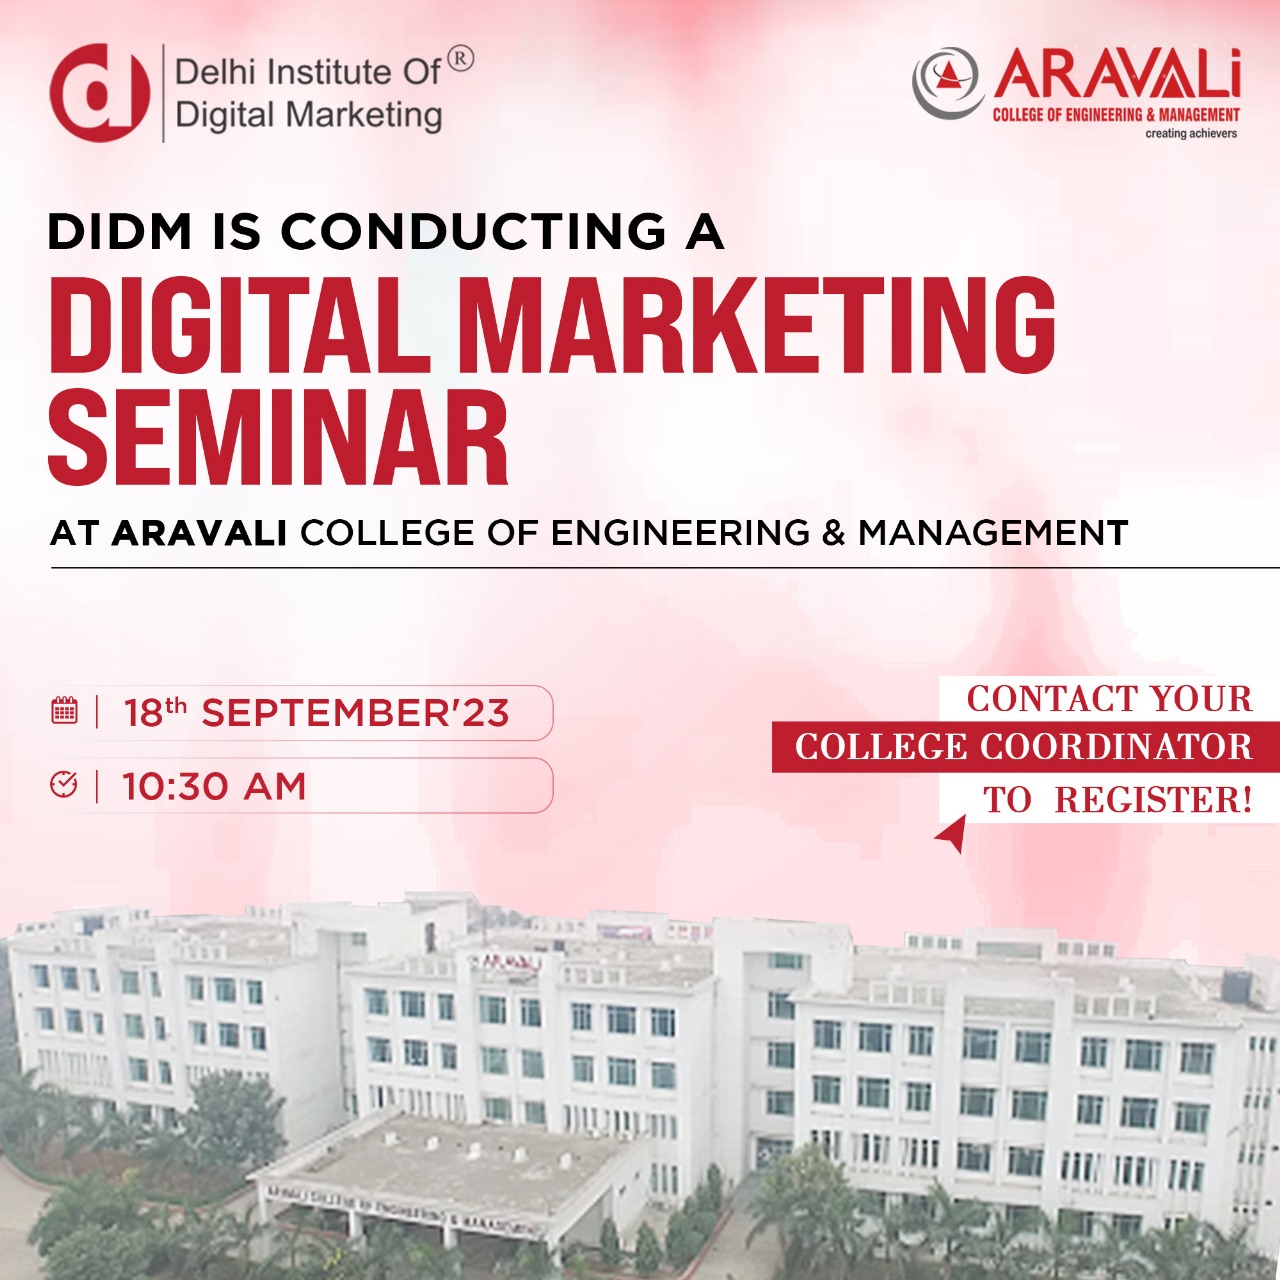 DIDM is Conducting a Digital Marketing Seminar at Aravali College of Engineering and Management